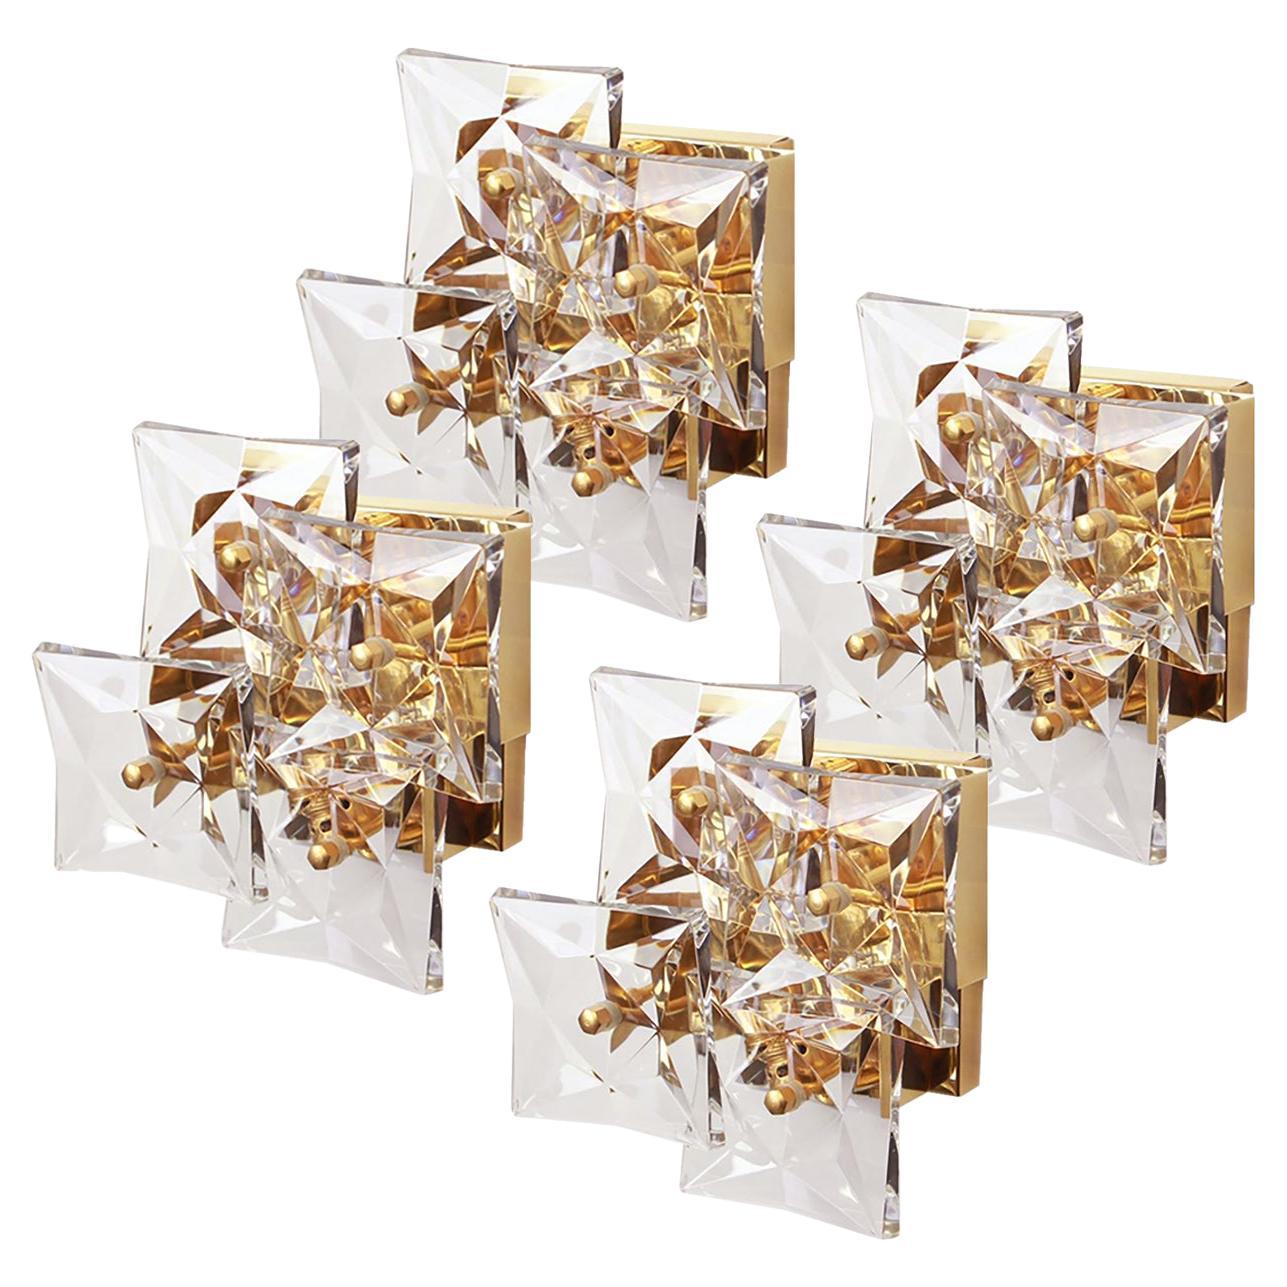 1 of the 10 golden sconces with crystal glasses, made by Kinkeldey, Germany, circa 1970-1979. It’s composed of square crystal glass pieces on gilded brass frame. Each one has a gilded metal frame and 3.94 x 3.94 in (4 x 10 x 10 cm). Best of the